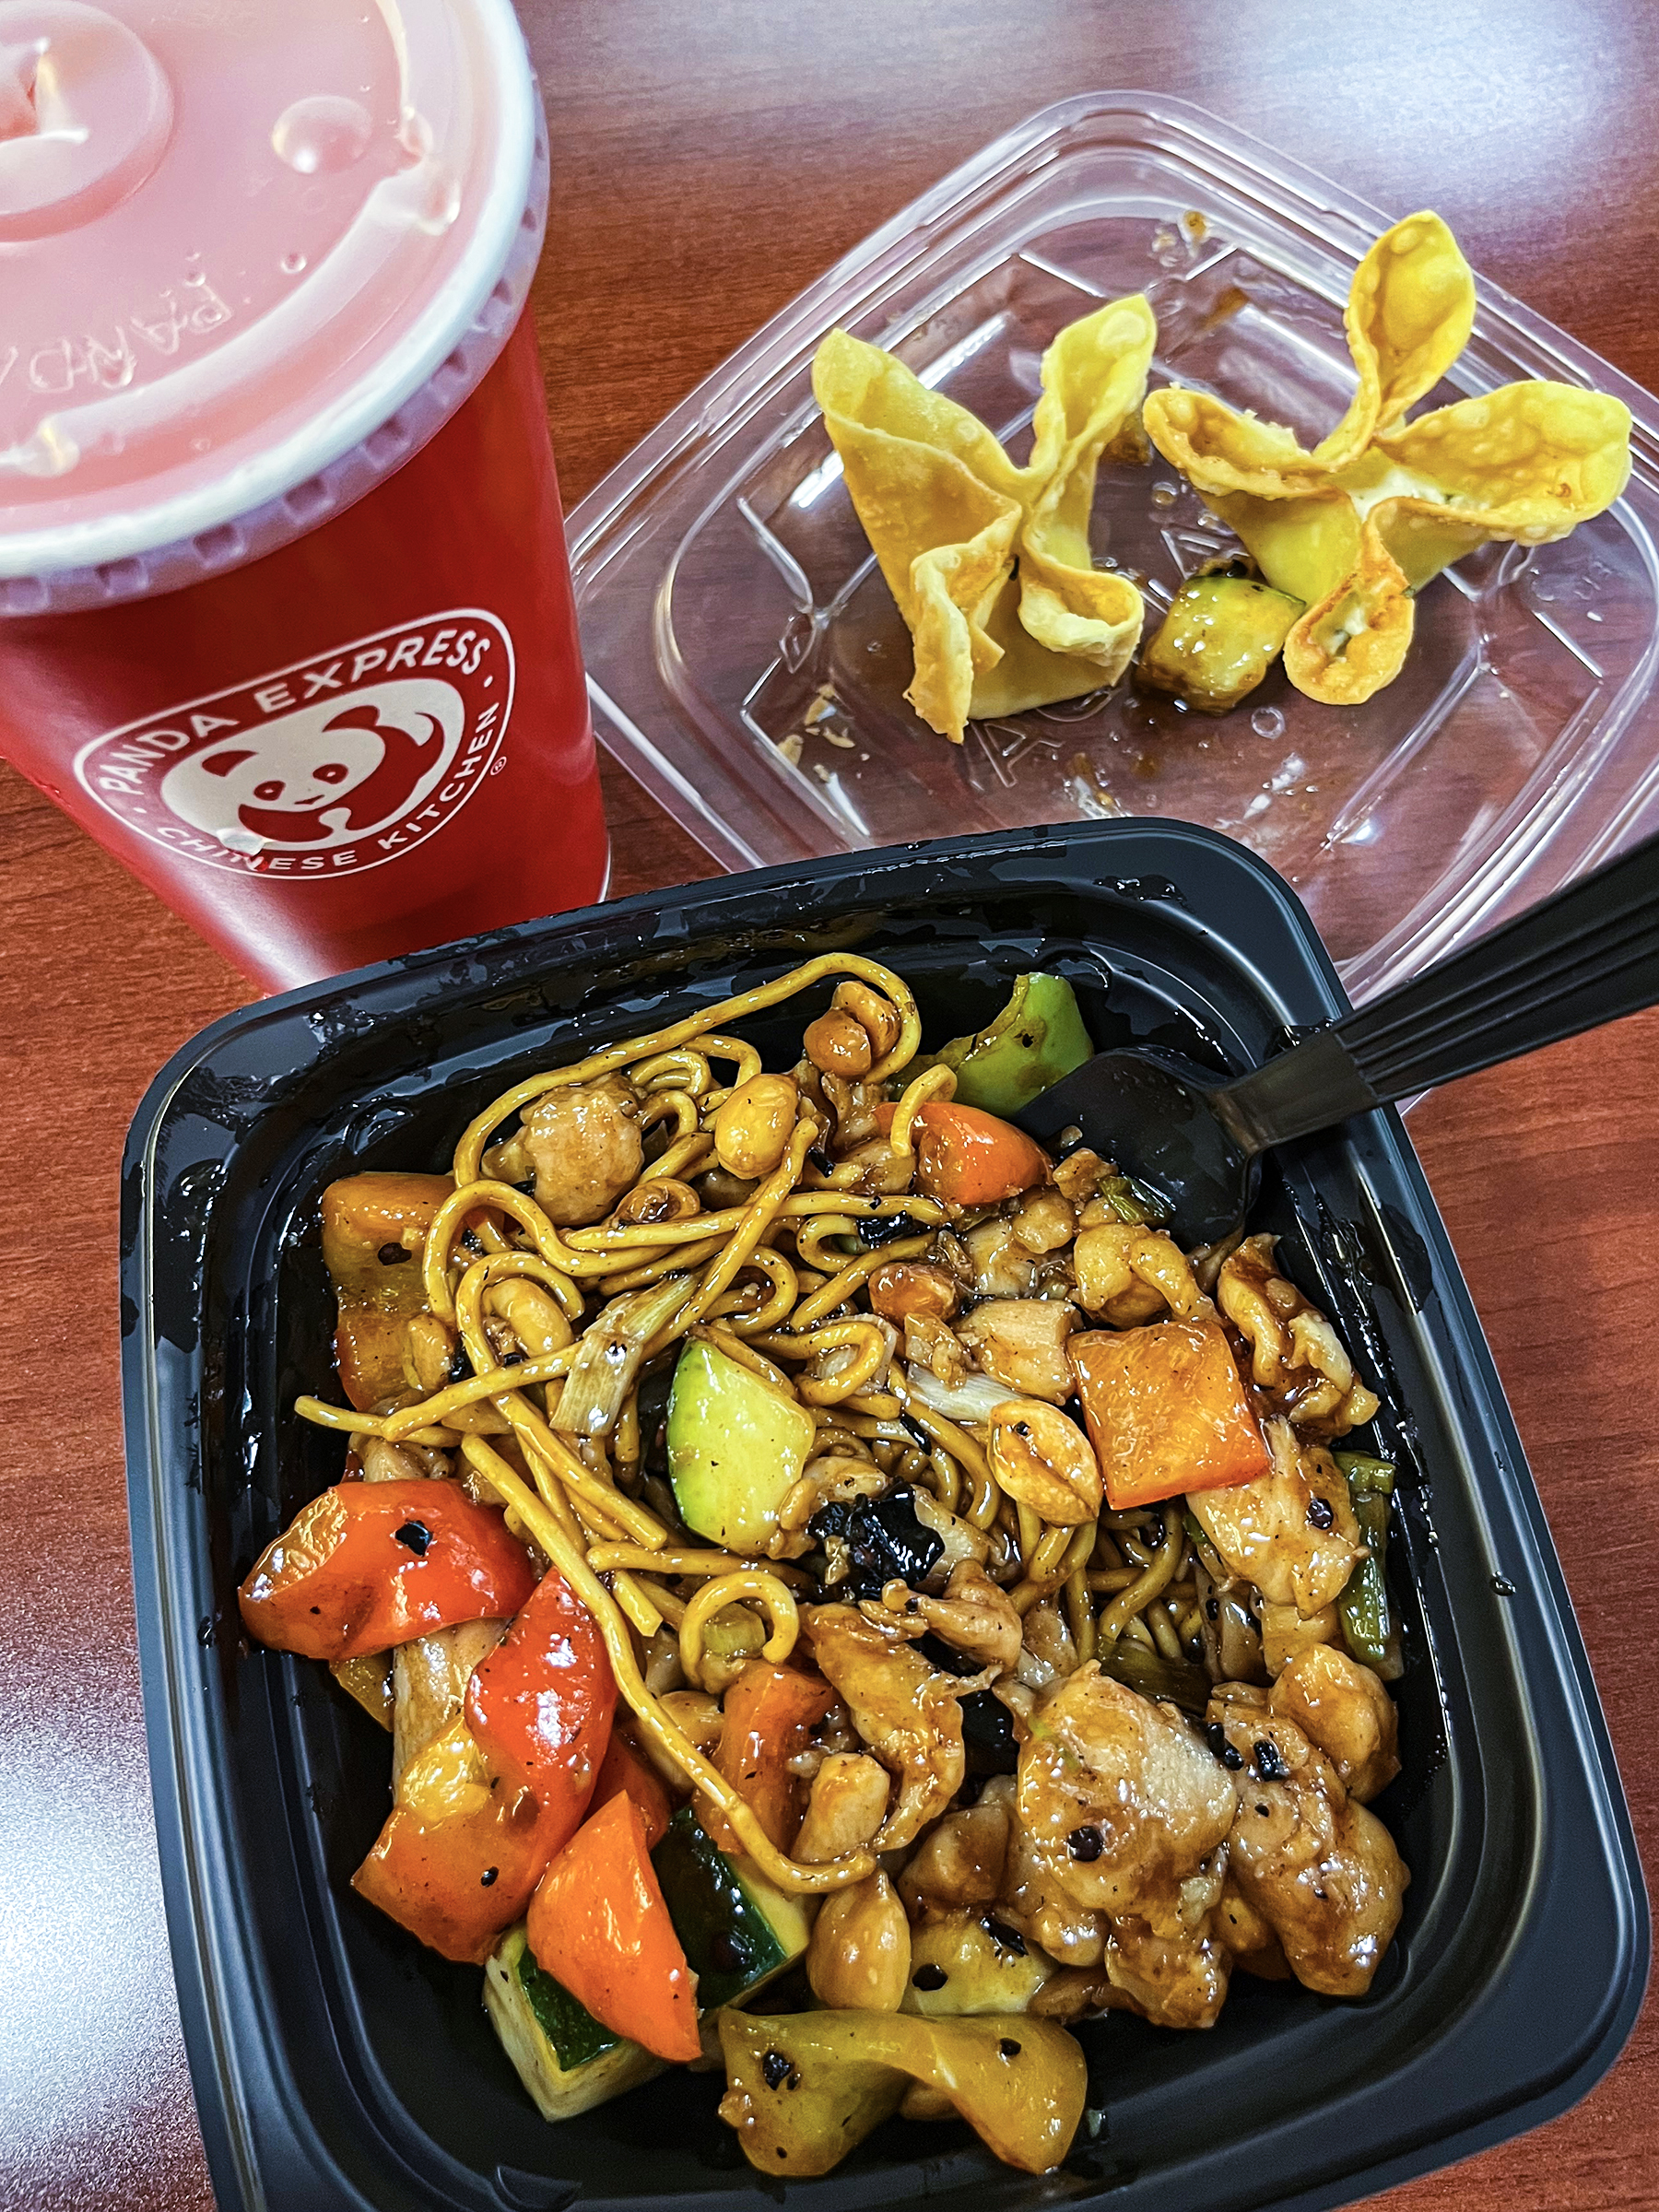 RSC Panda Express Kung Pao Chicken with Chow Mein and Cream Cheese Rangoon.